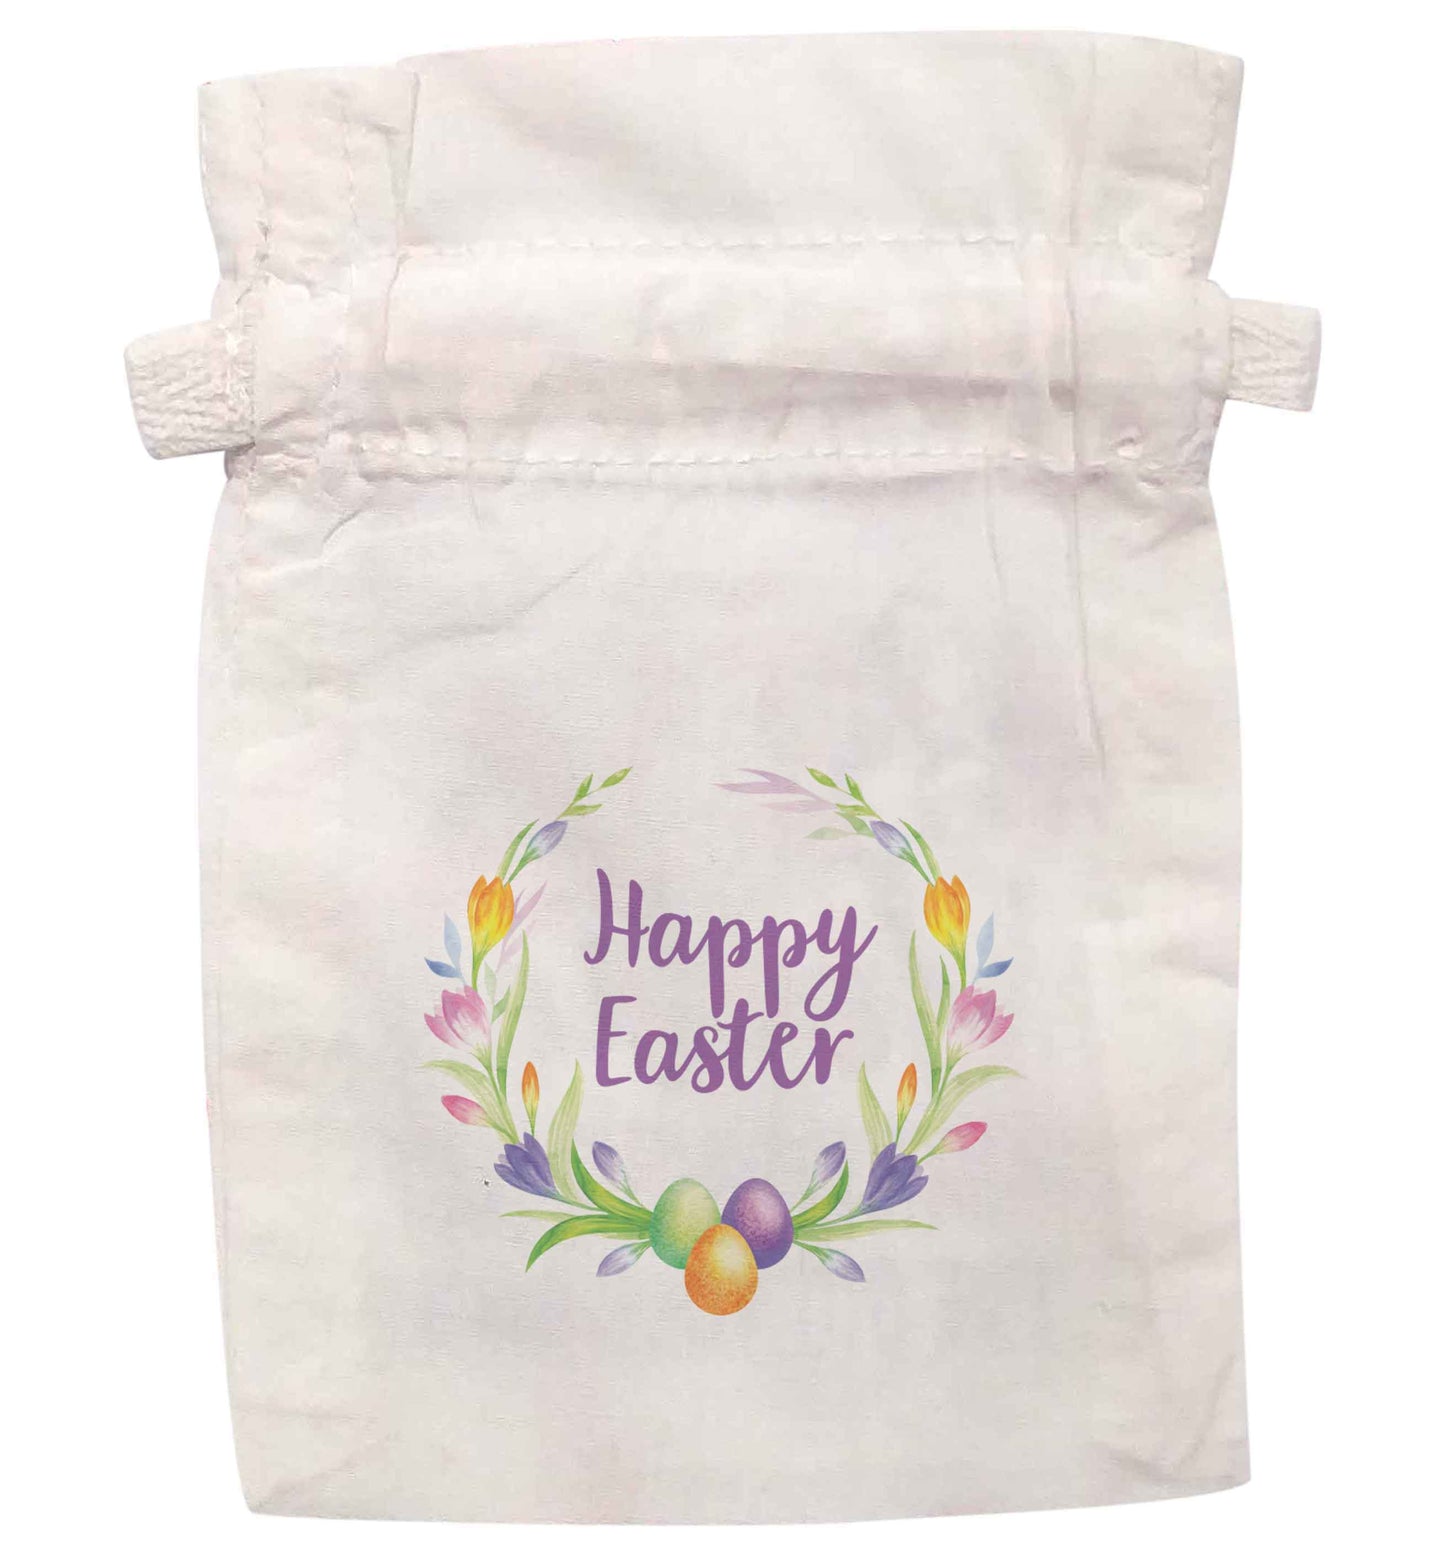 Happy Easter floral wreath | XS - L | Pouch / Drawstring bag / Sack | Organic Cotton | Bulk discounts available!